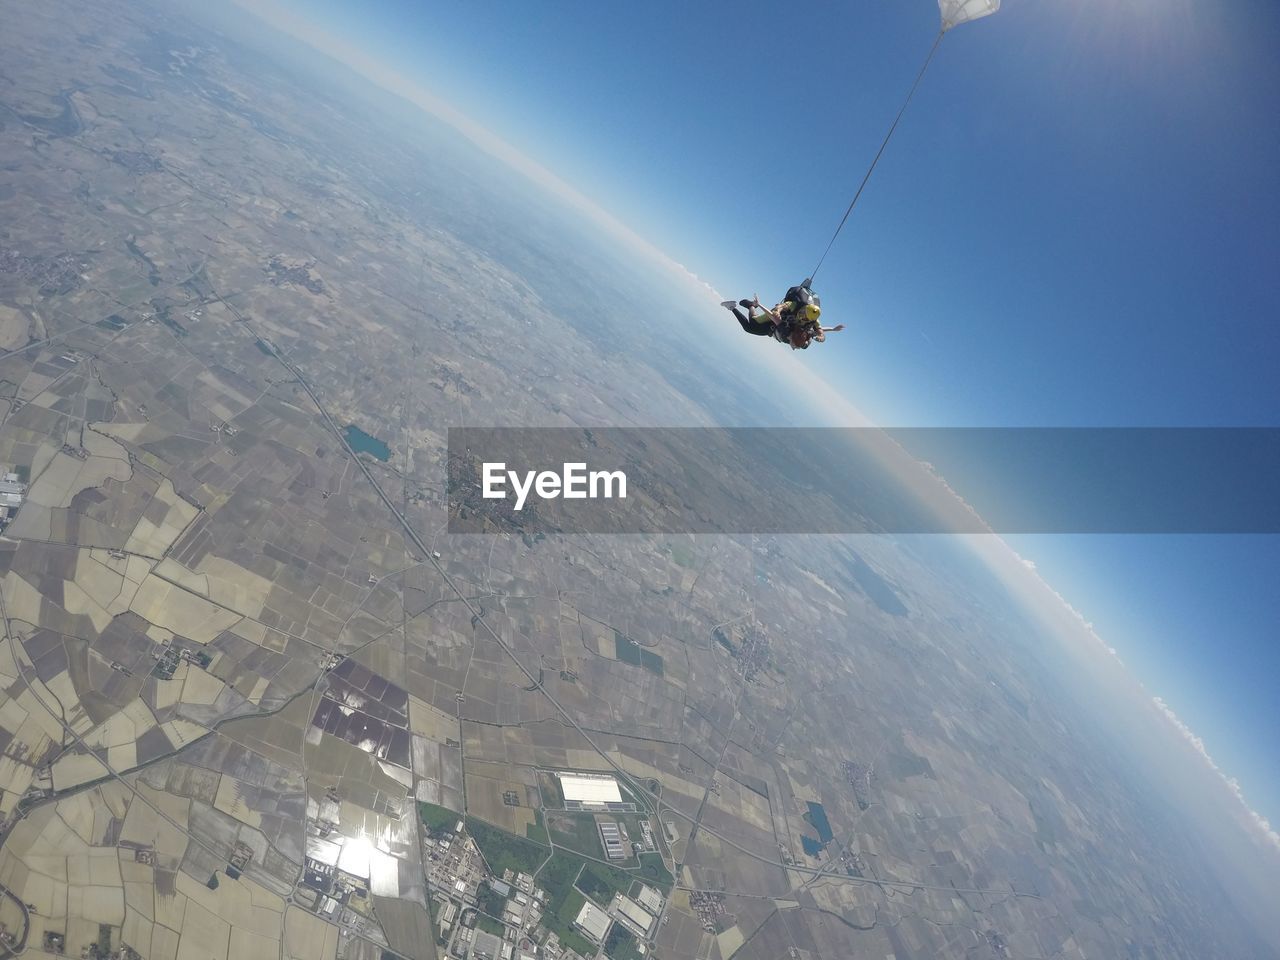 Couple skydiving in italy, looking at the horizon from  above 